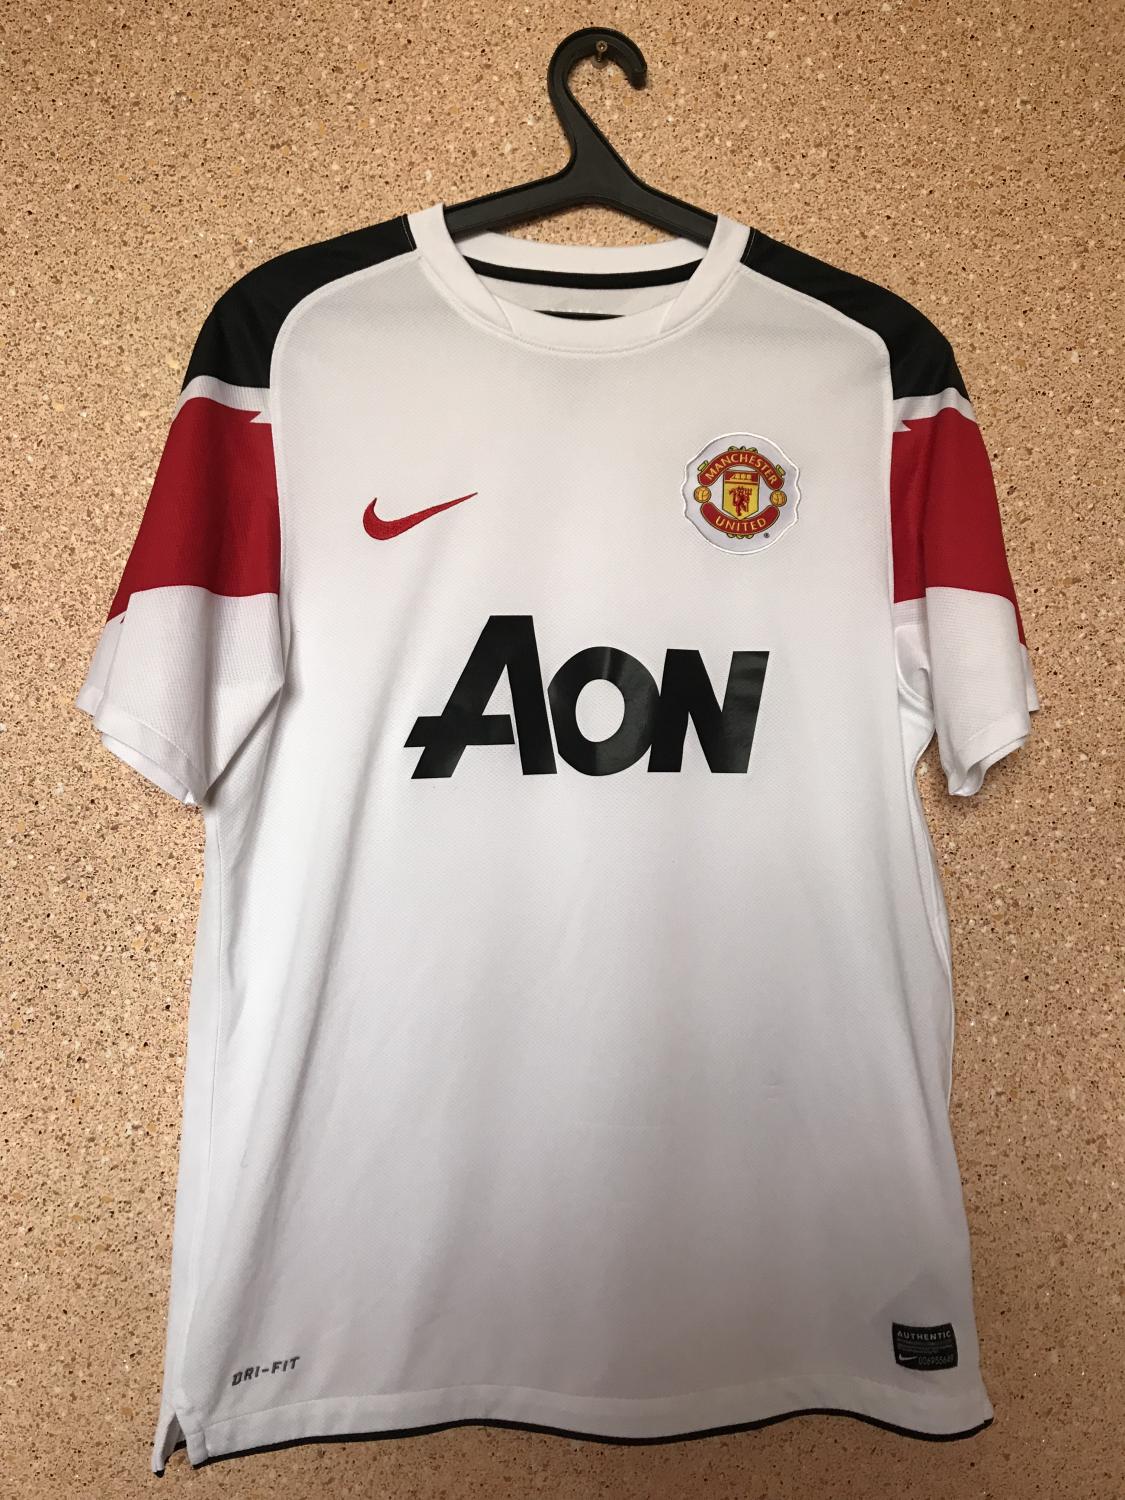 Manchester United Away football shirt 2010 - 2011. Sponsored by AON